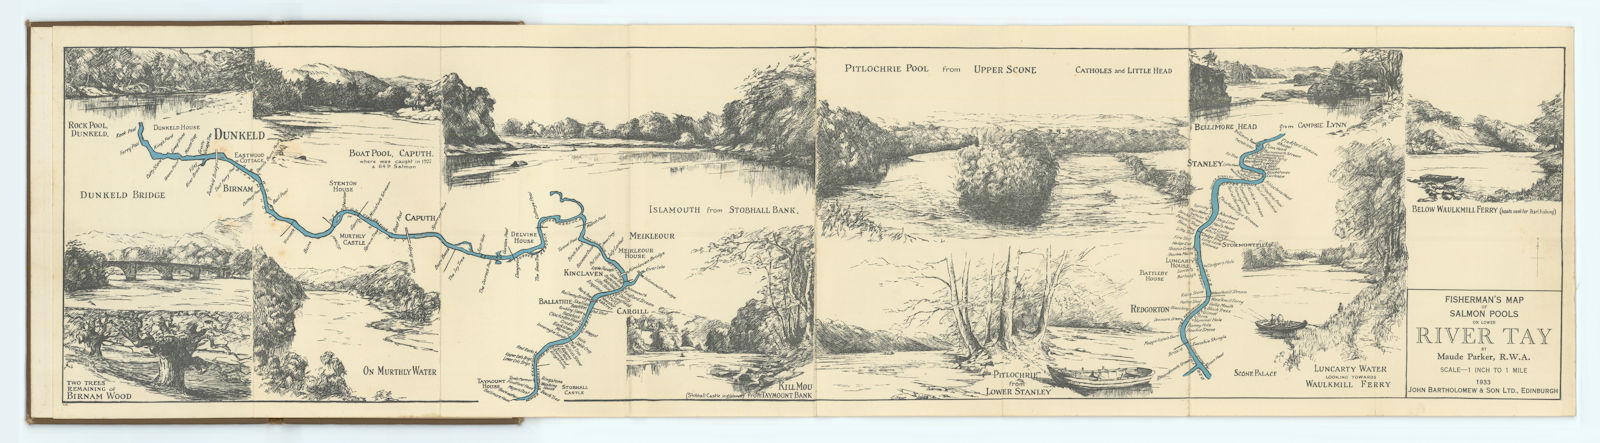 Associate Product Fisherman's Map of Salmon Pools on lower River Tay by Maude Parker 1933